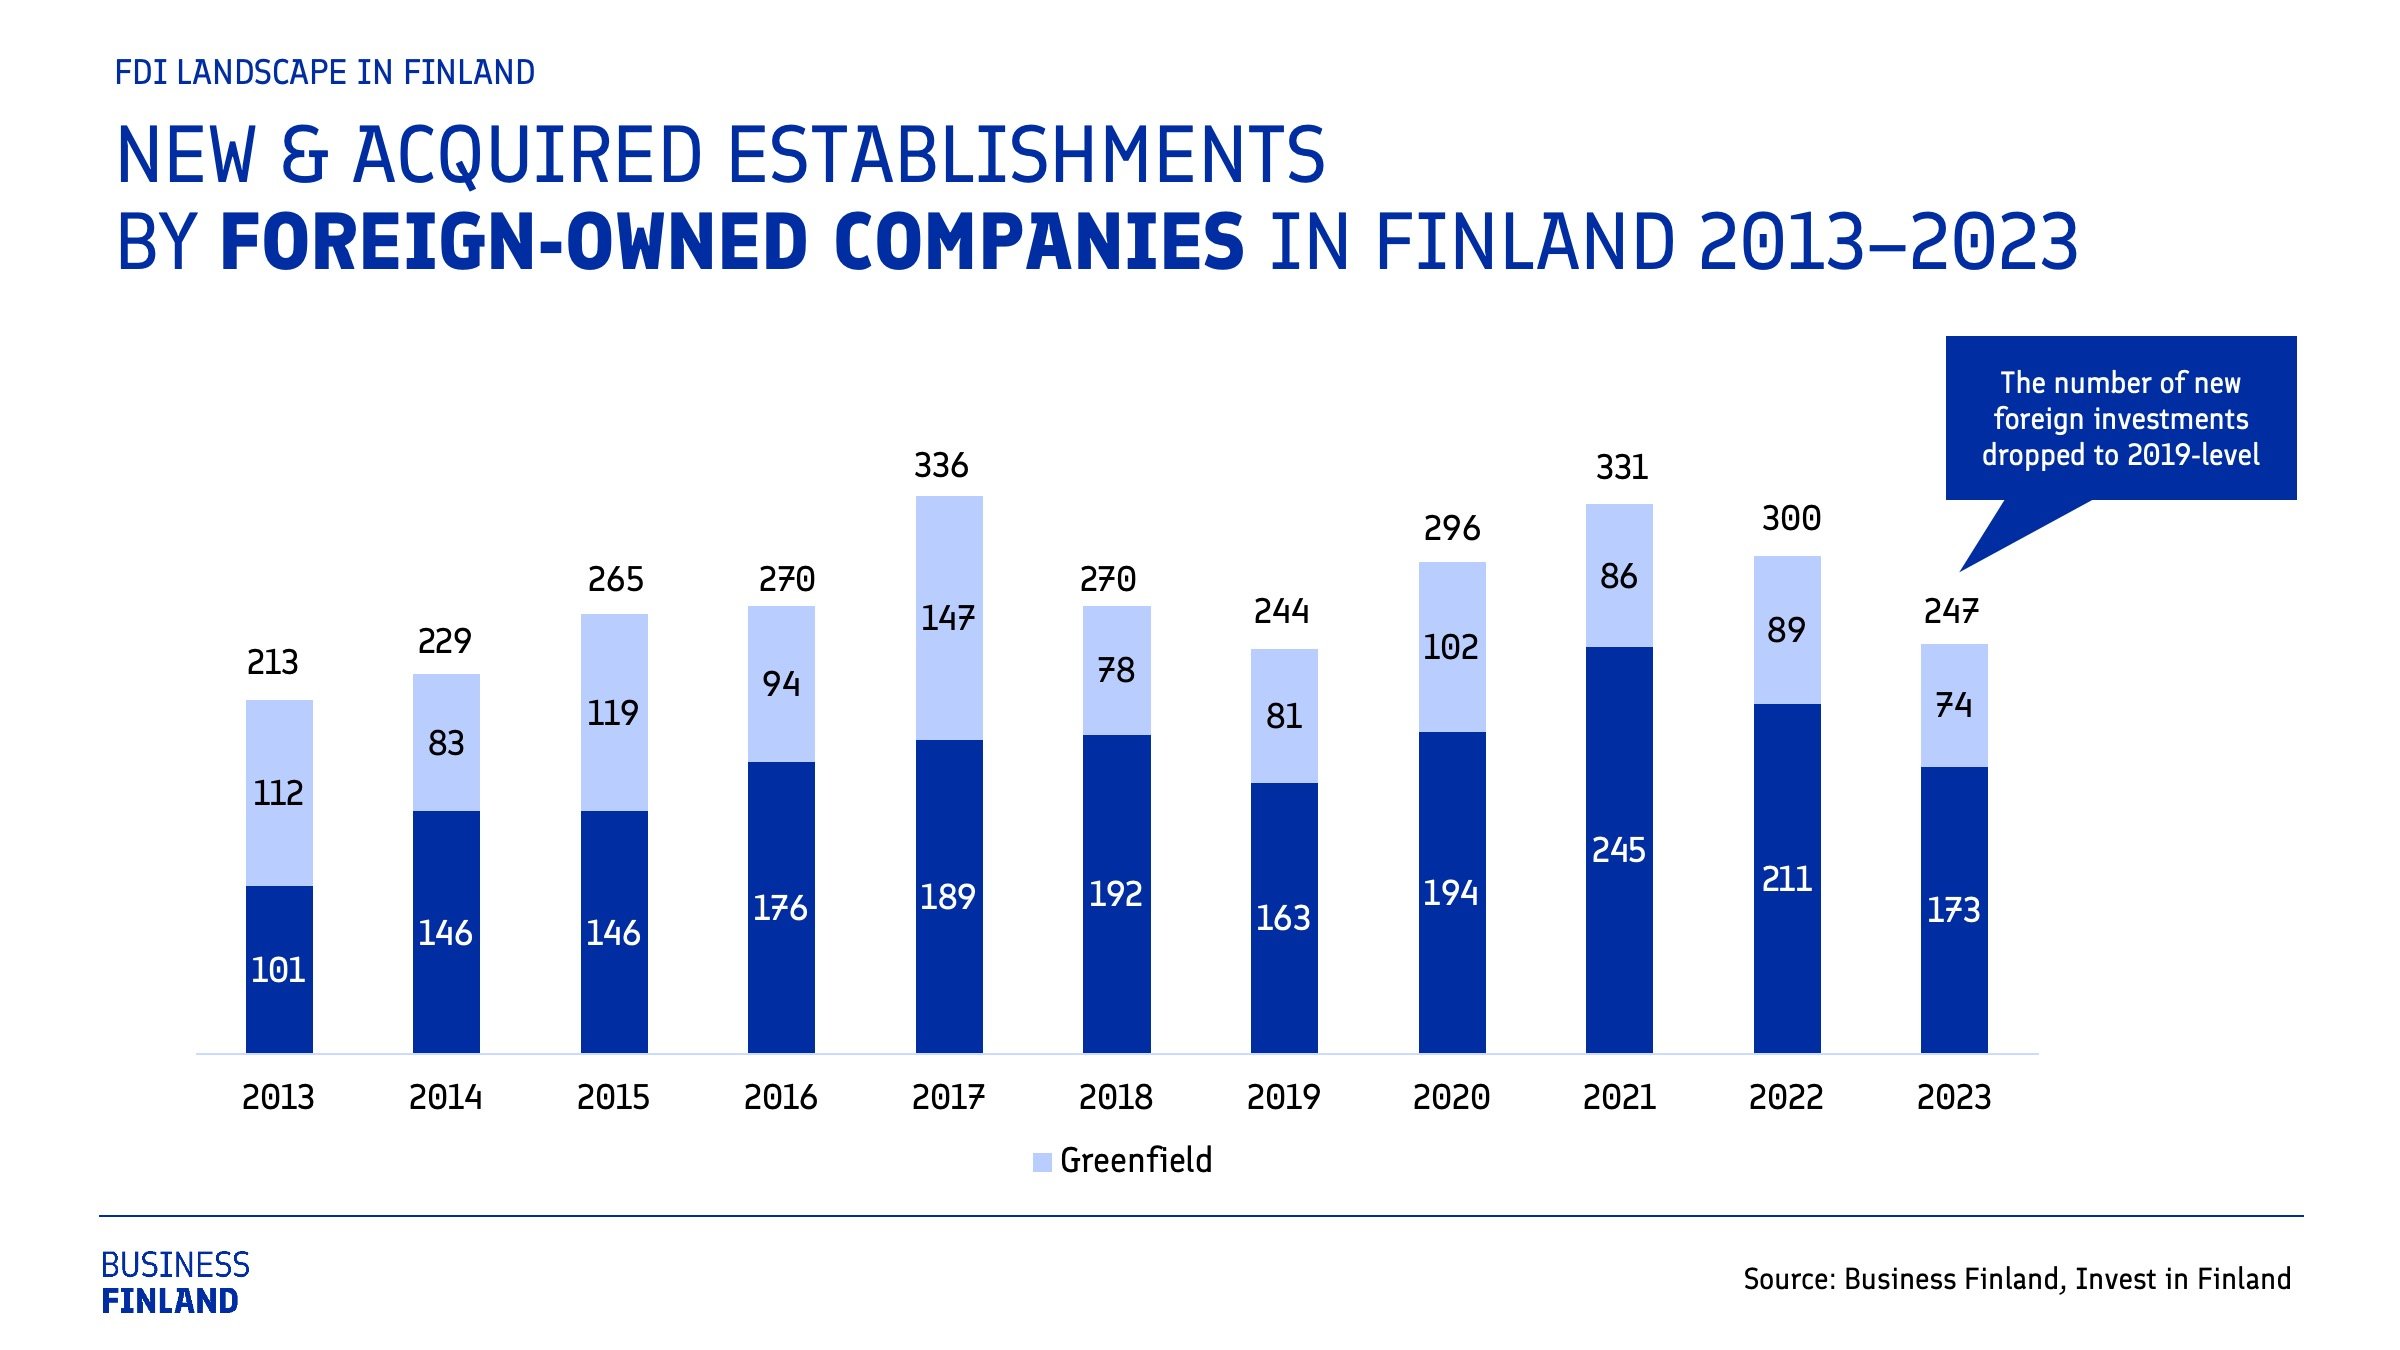 New and acquired establishments to Finland 2013-2023